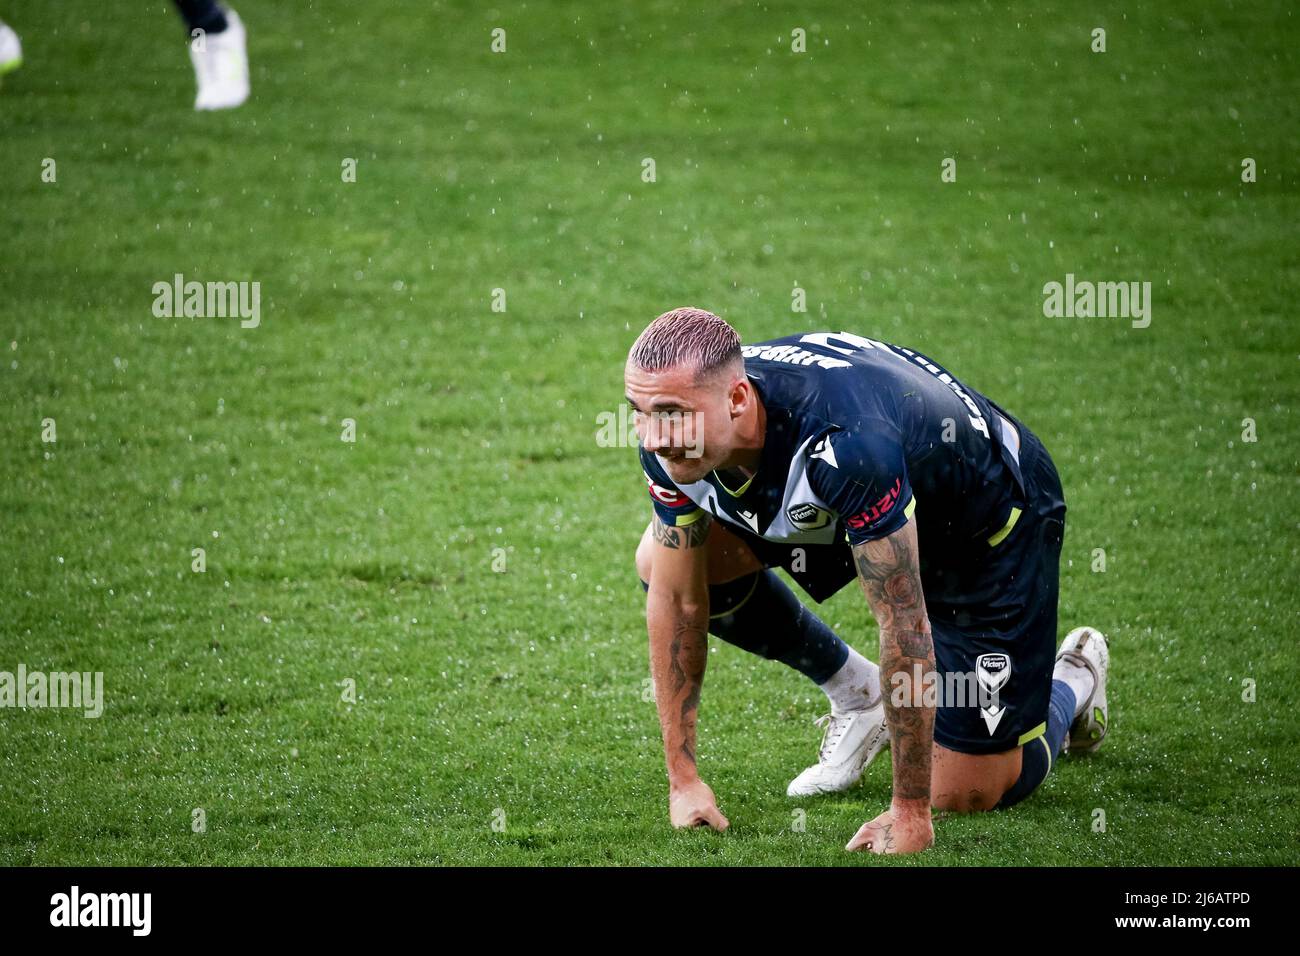 Melbourne, Australia, 29 April, 2022. Jason Davidson of Melbourne Victory during the A-League soccer match between Melbourne Victory and Wellington Phoenix at AAMI Park on April 29, 2022 in Melbourne, Australia. Credit: Dave Hewison/Speed Media/Alamy Live News Stock Photo